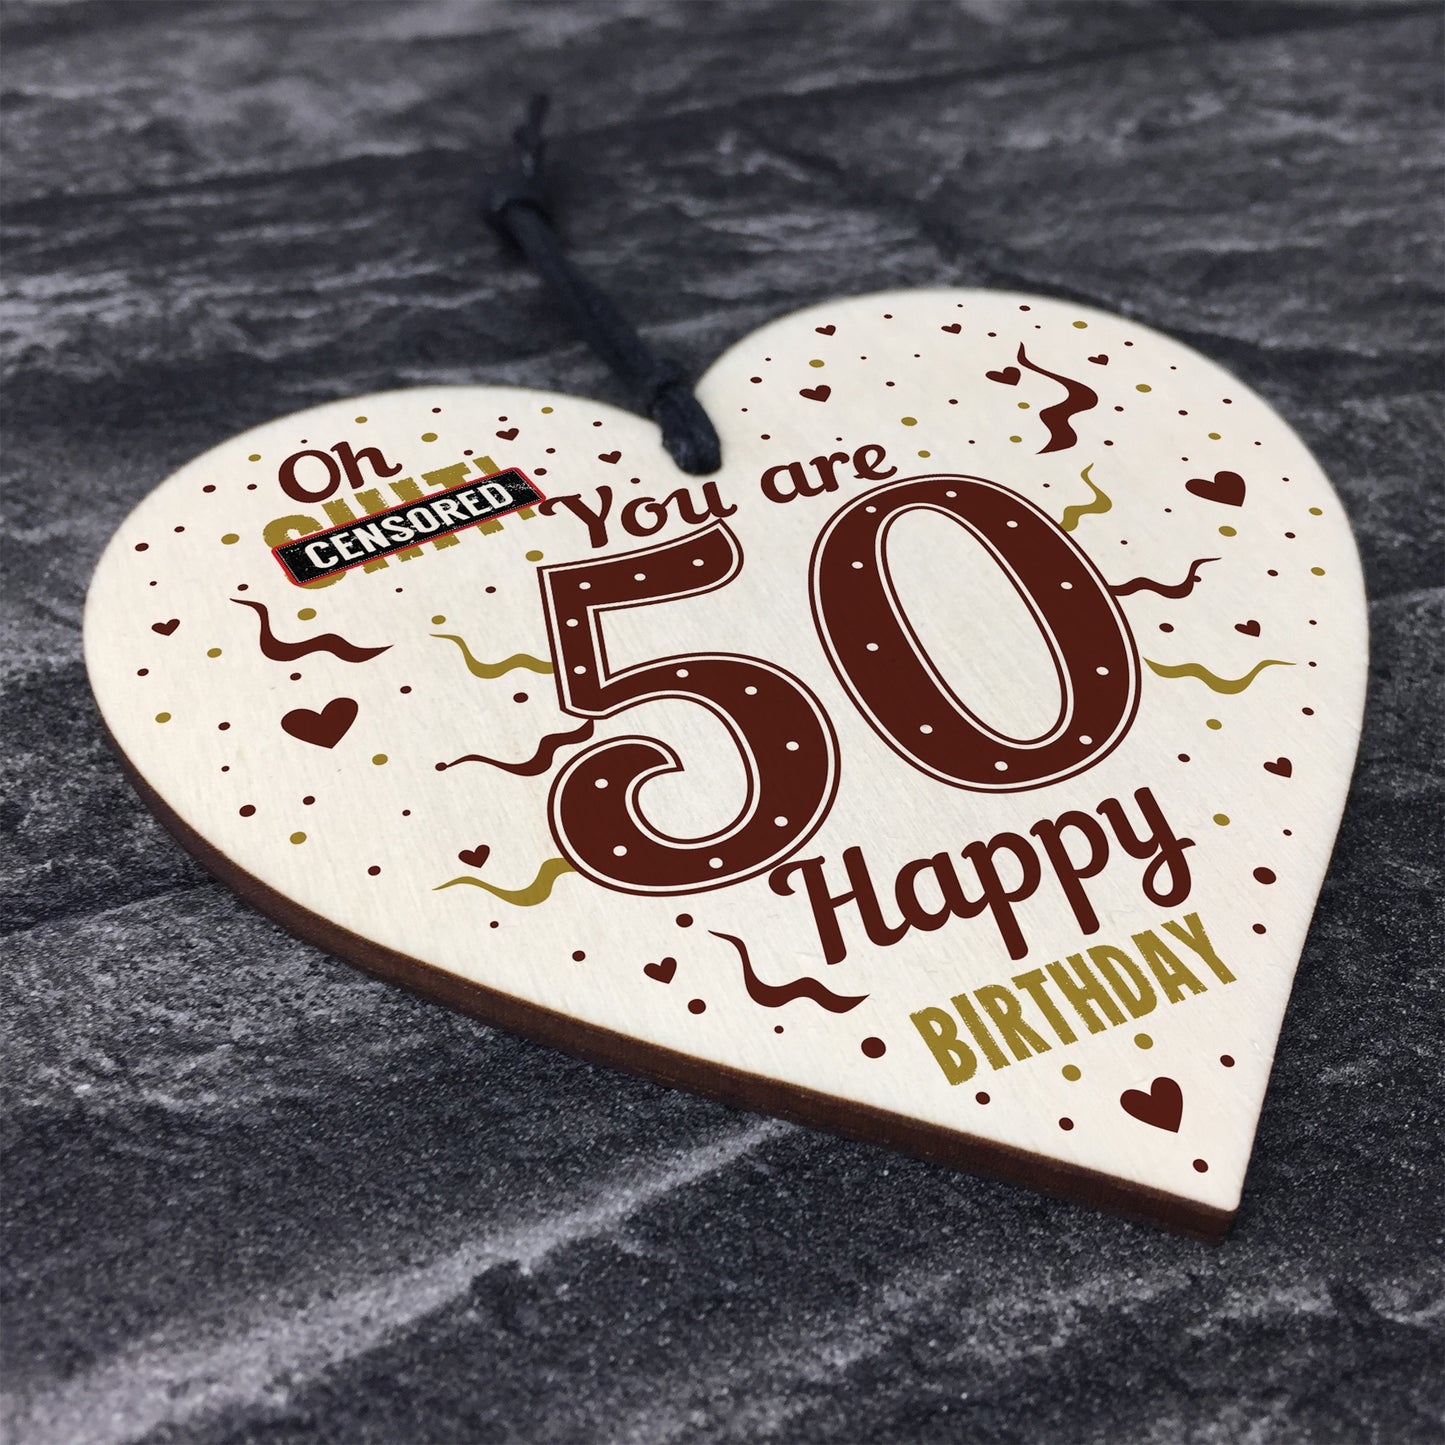 50th Birthday Gifts For Women 50th Birthday Gifts For Men Heart